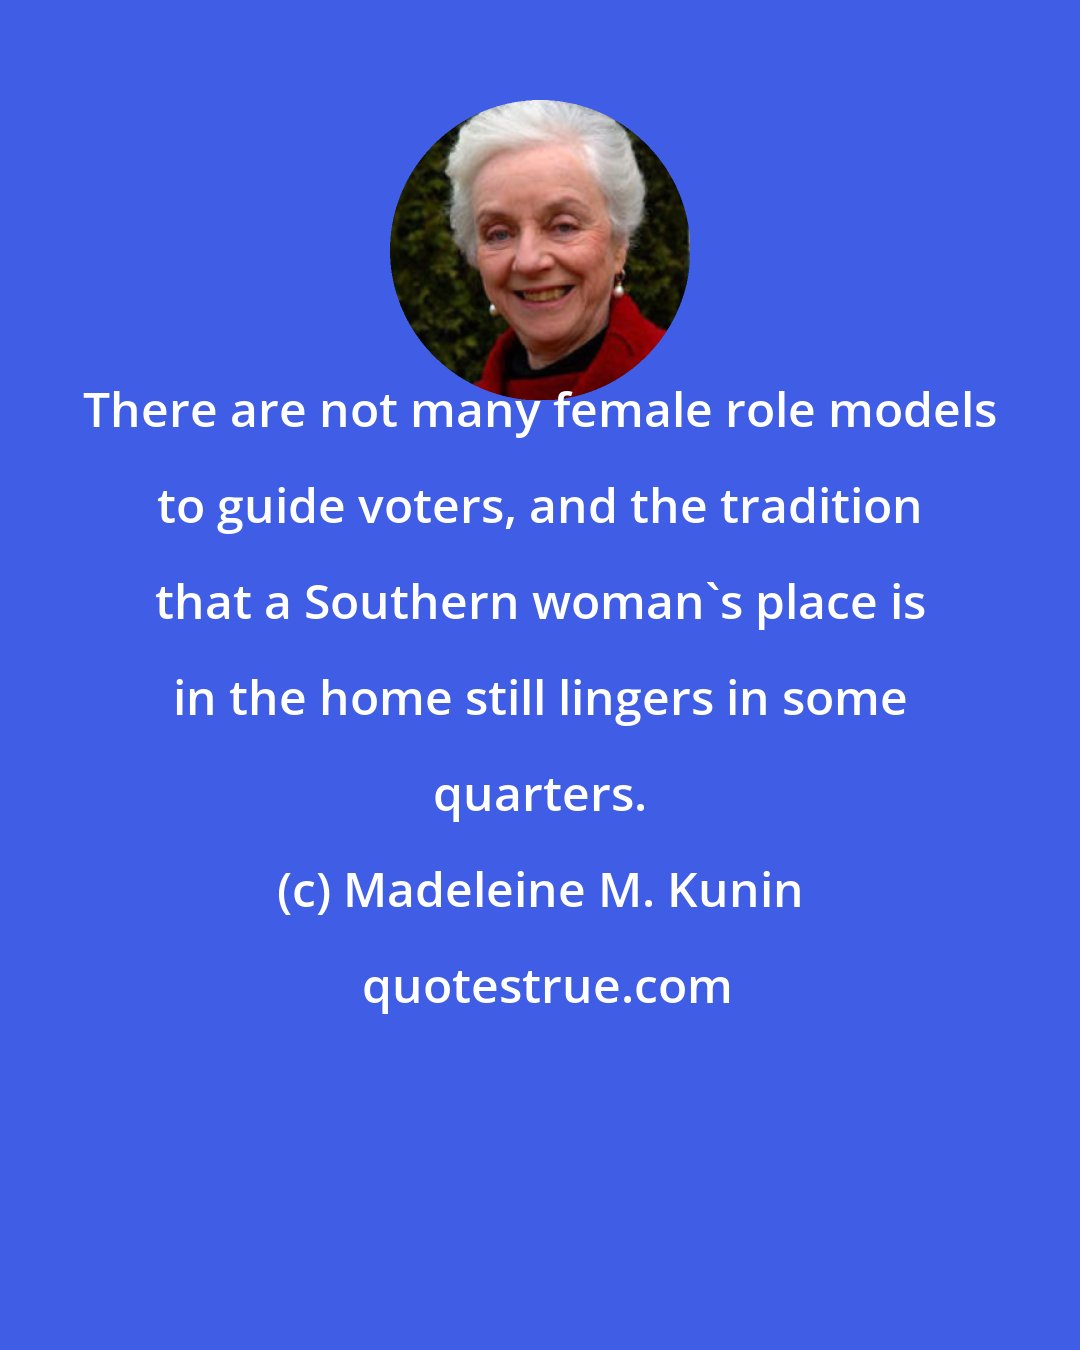 Madeleine M. Kunin: There are not many female role models to guide voters, and the tradition that a Southern woman's place is in the home still lingers in some quarters.